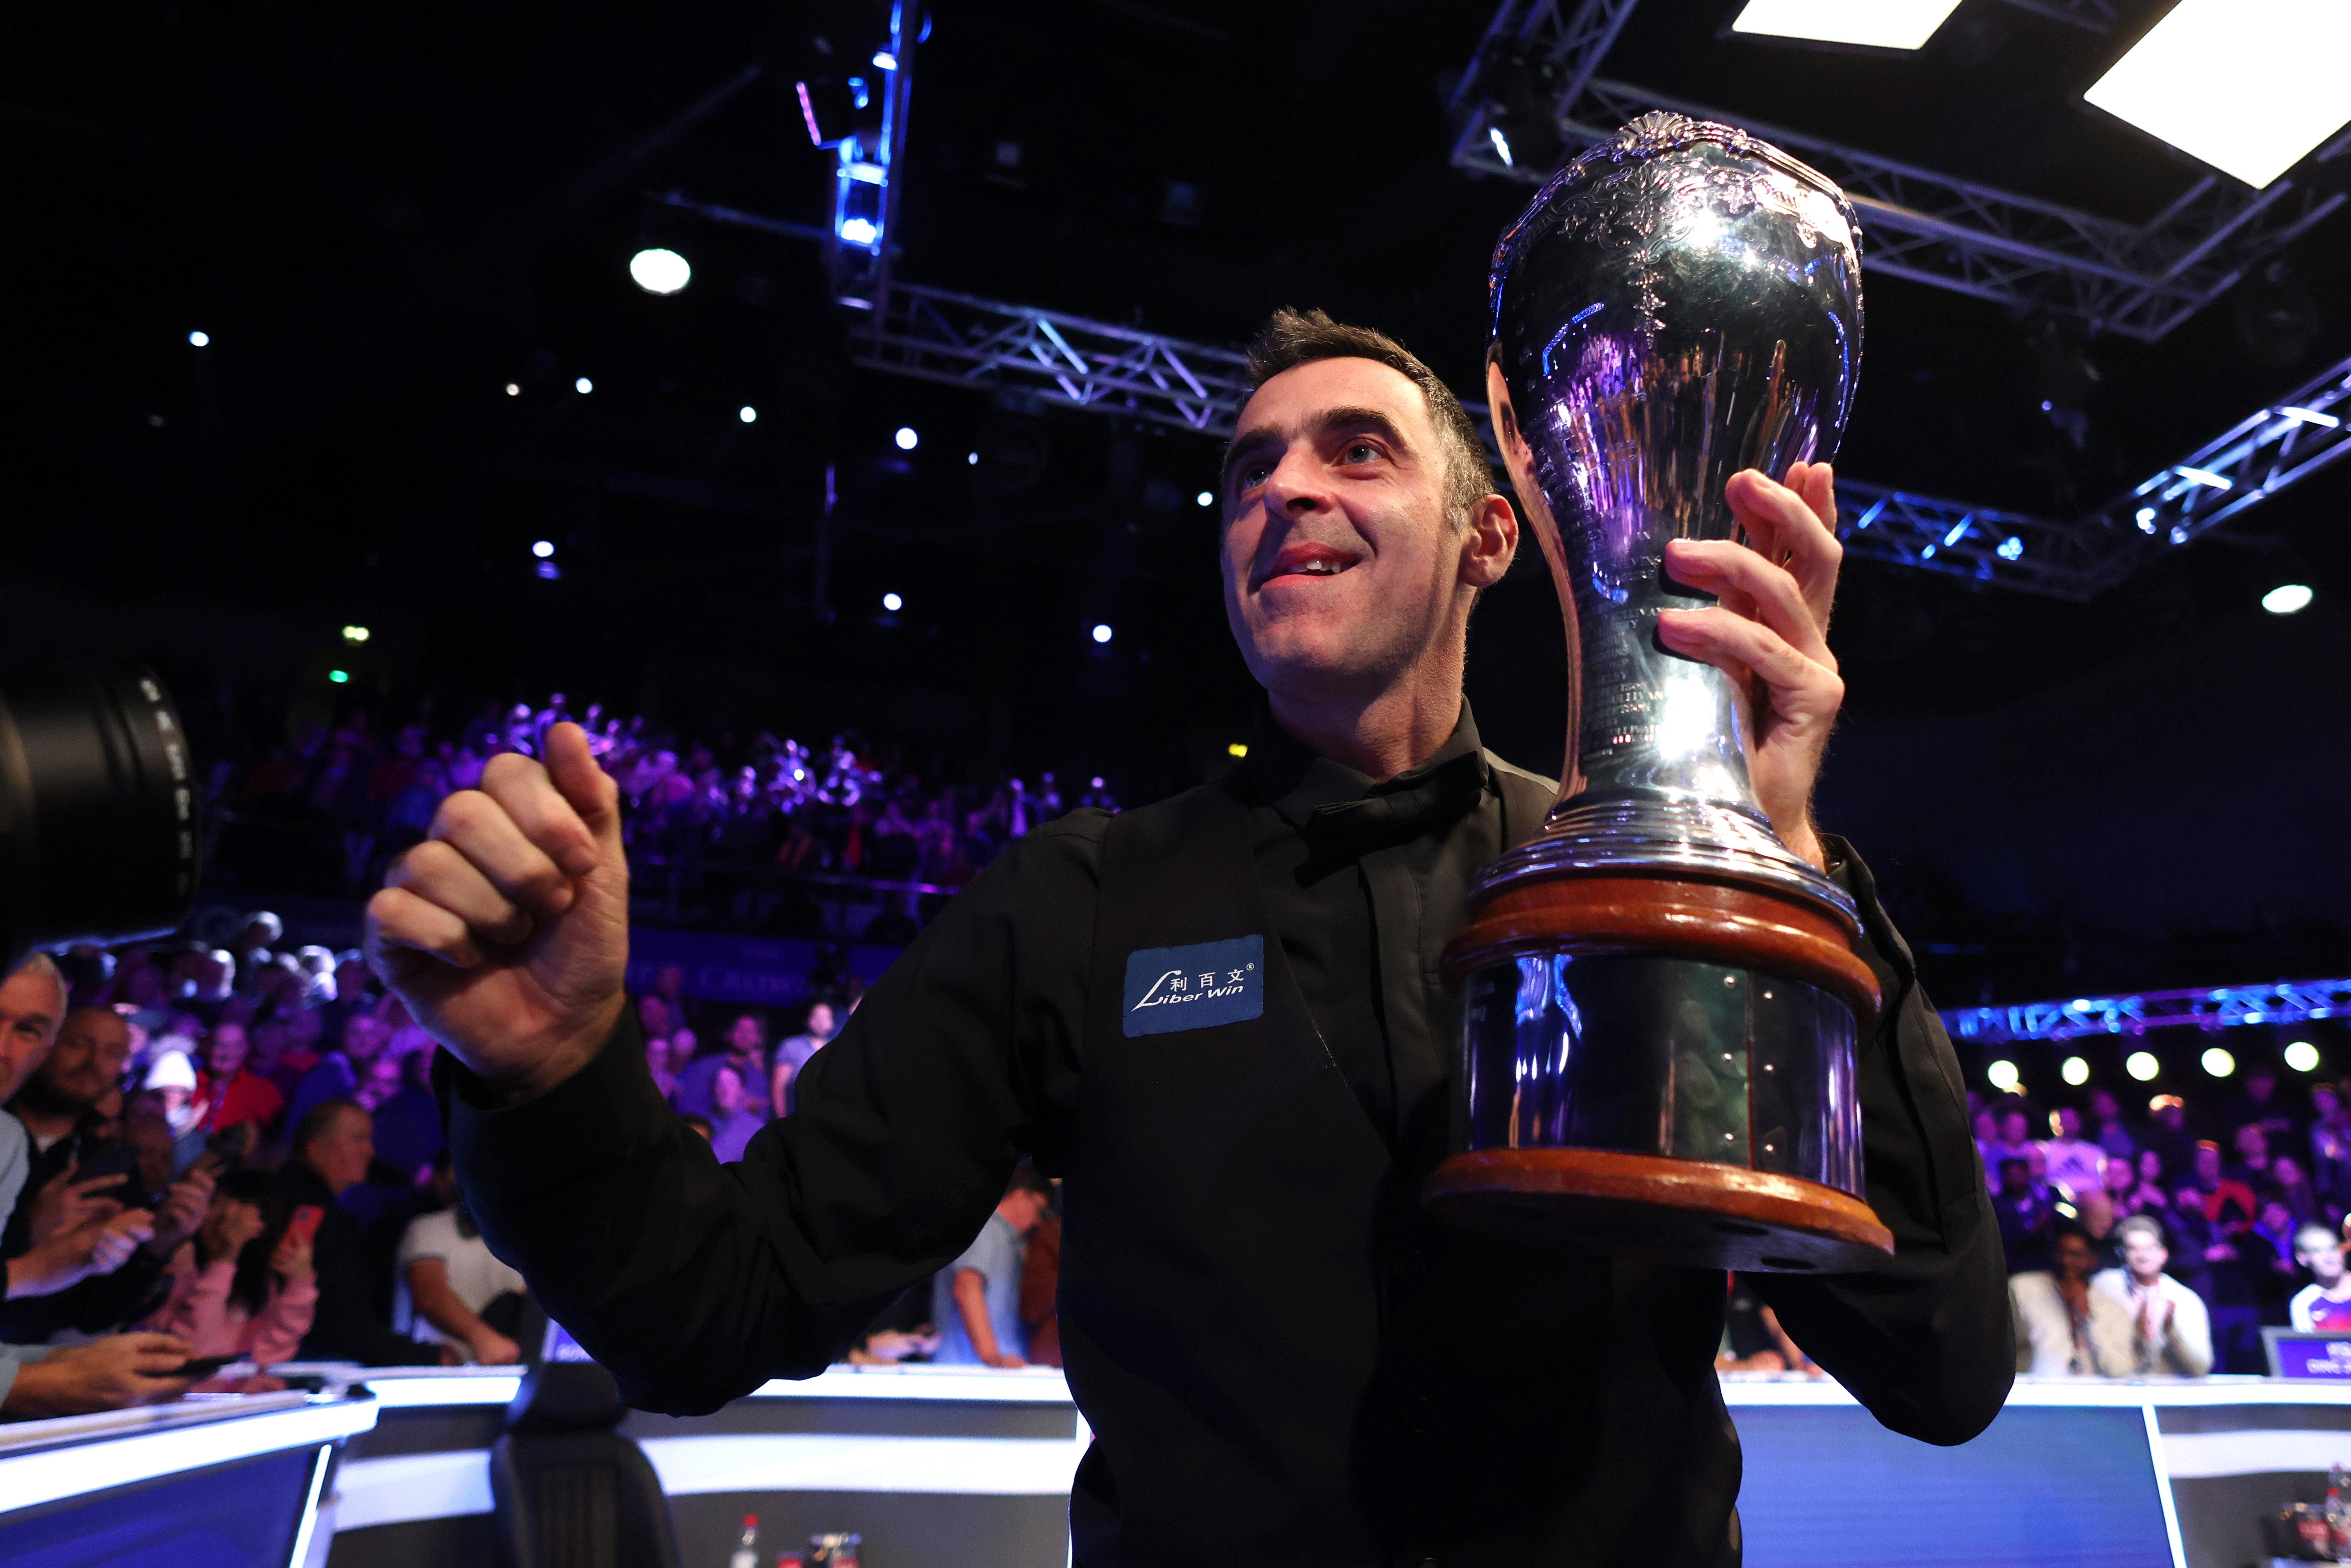 Ronnie O’Sullivan has had yet another dominant year